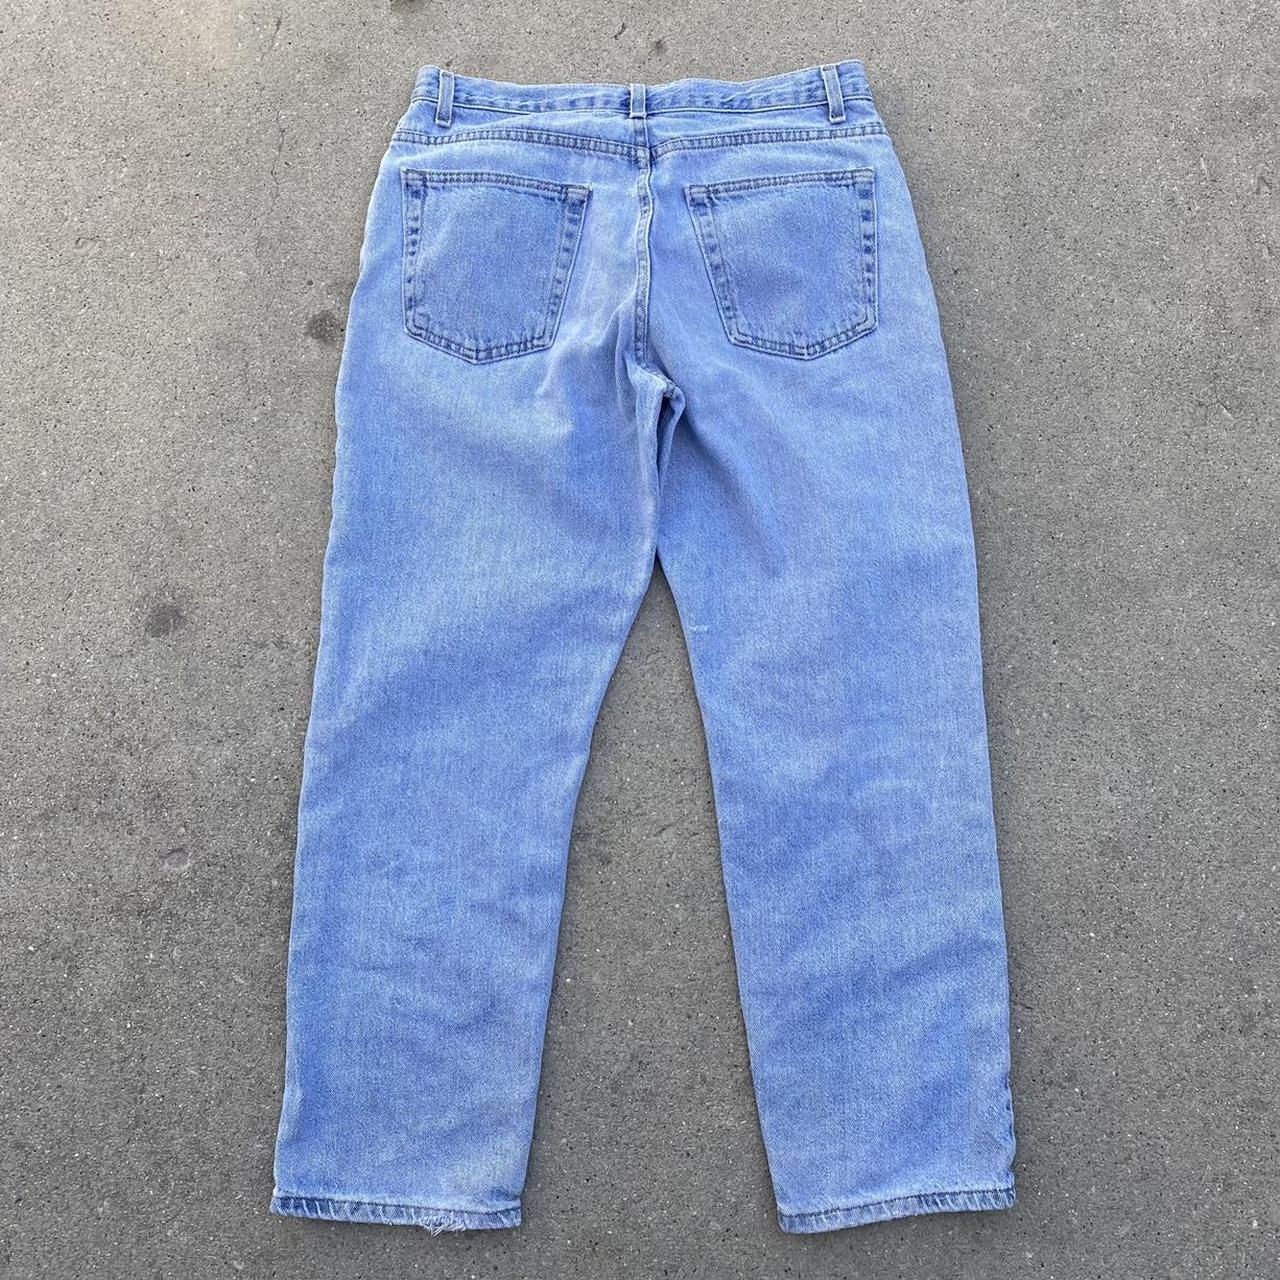 Vintage Perfectly Faded Denim Jeans. Tagged 34x30,... - Depop